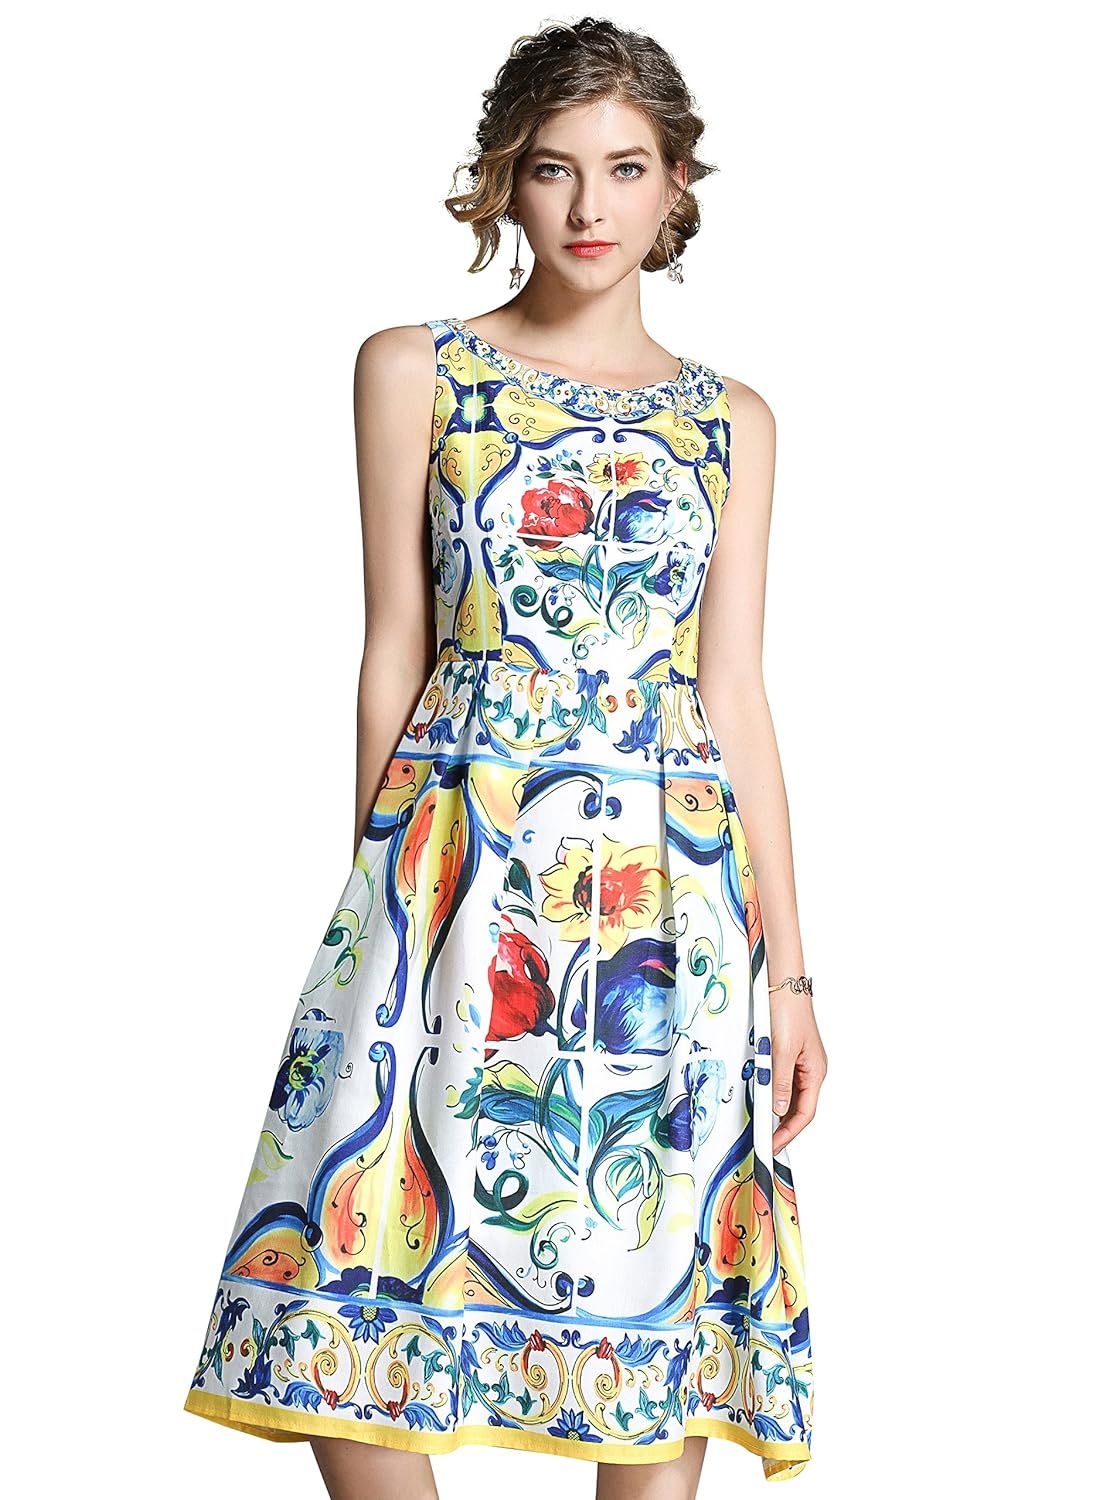 LAI MENG FIVE CATS Women's Sleeveless Floral Printed Sundress Casual Dress | Amazon (US)